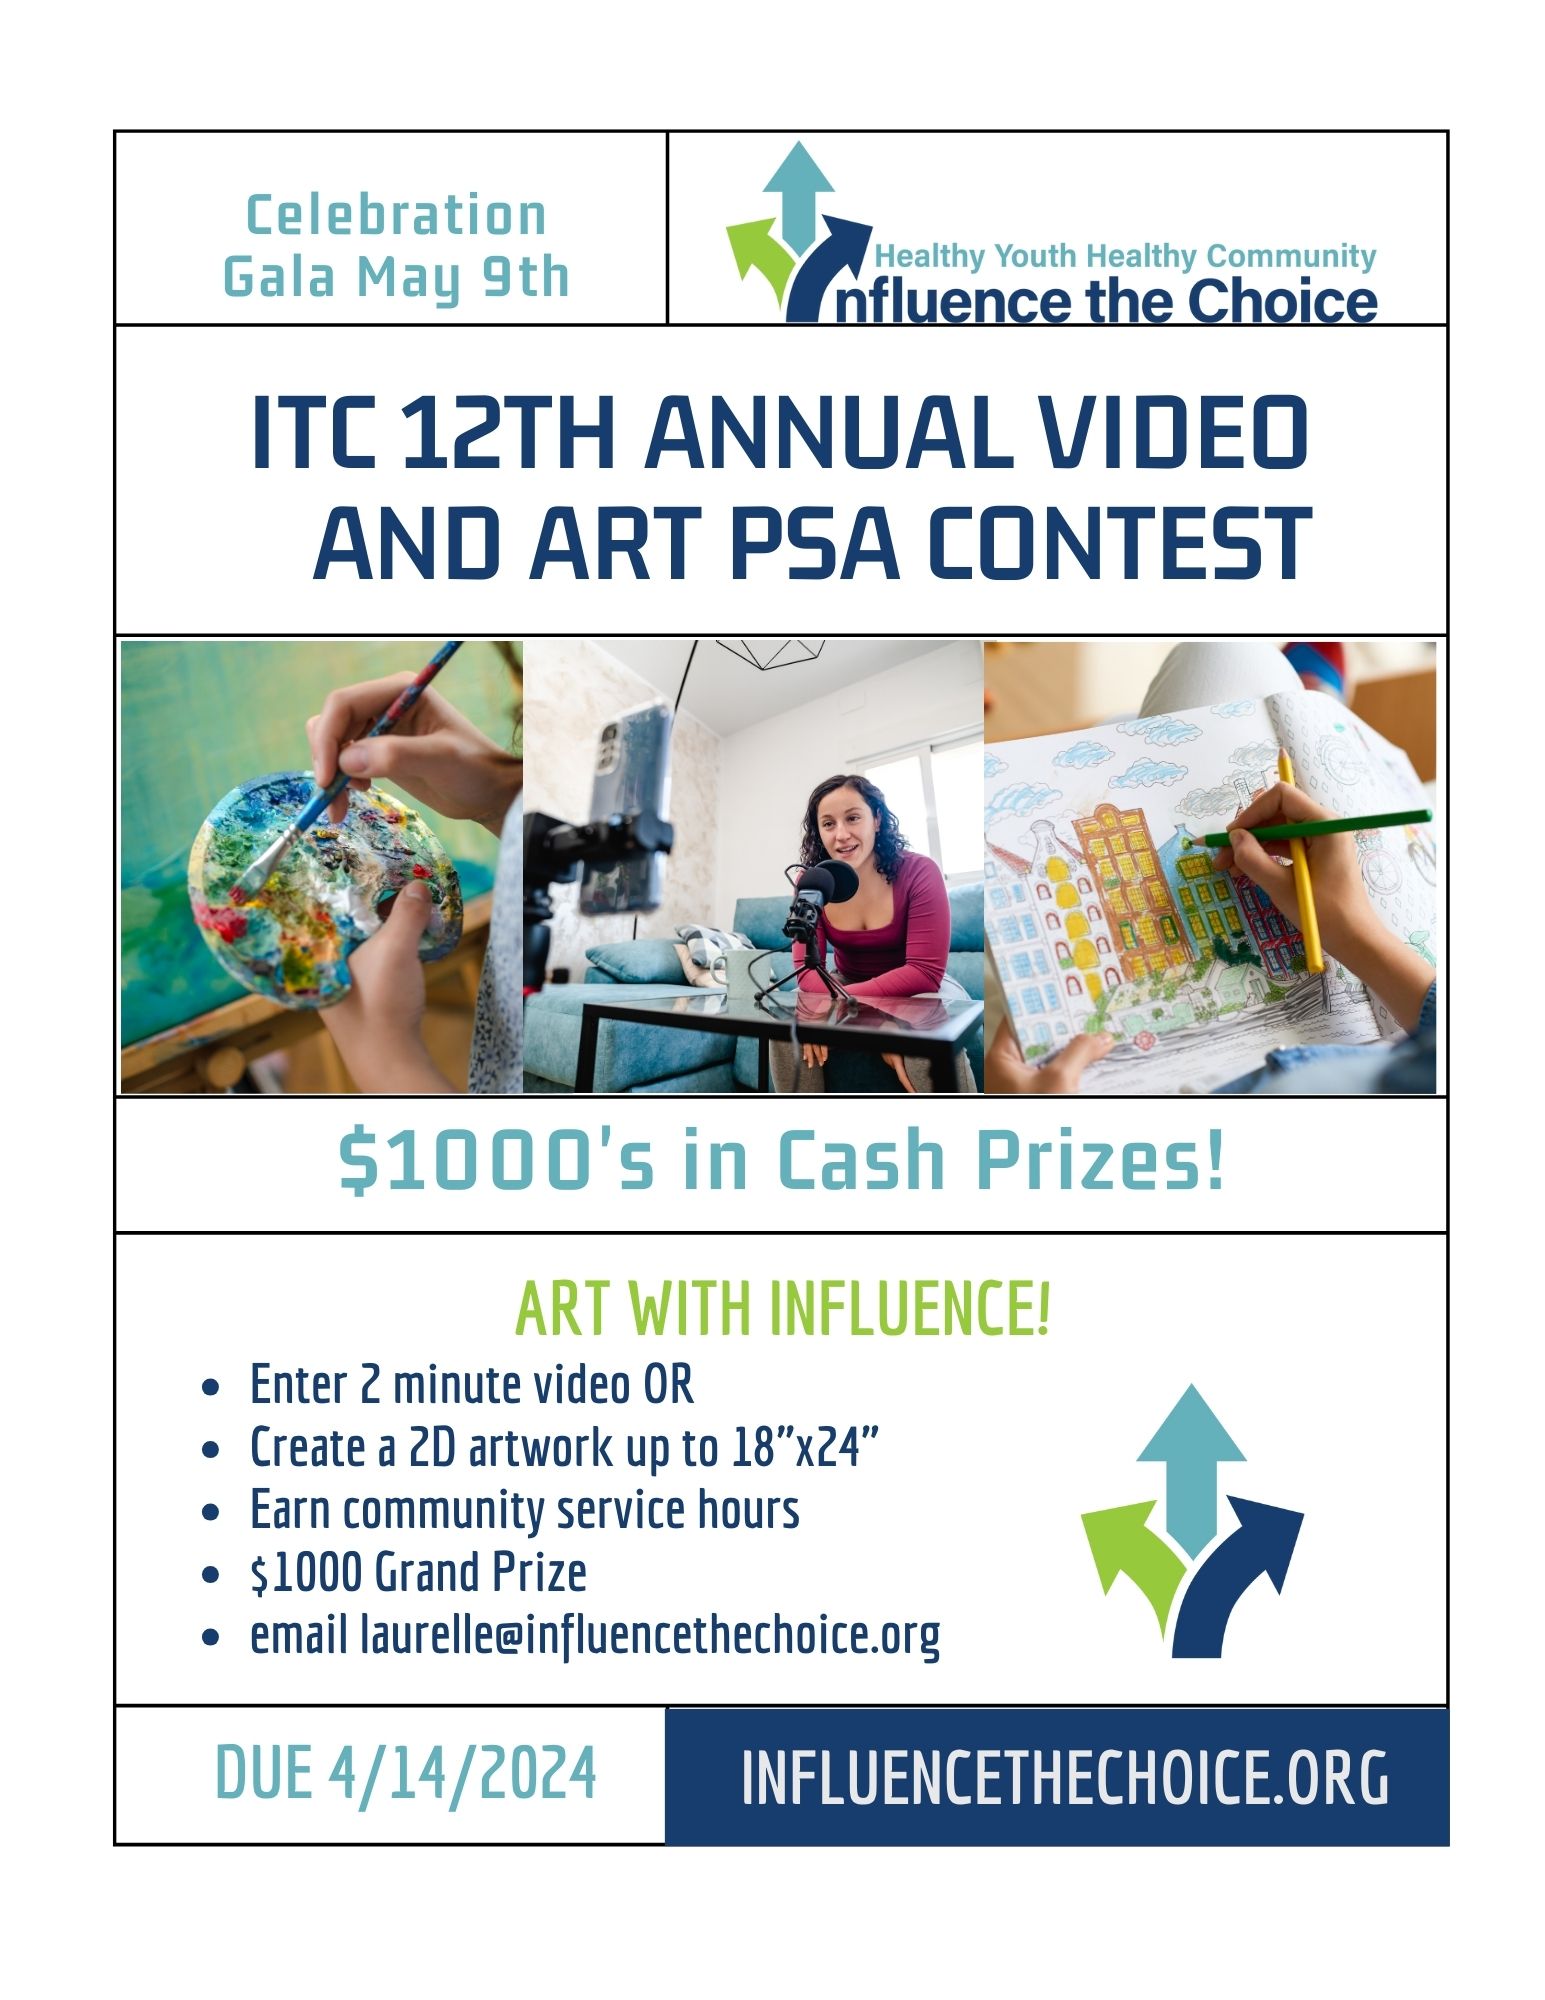 https://www.influencethechoice.org/student-video-contest-2024.html